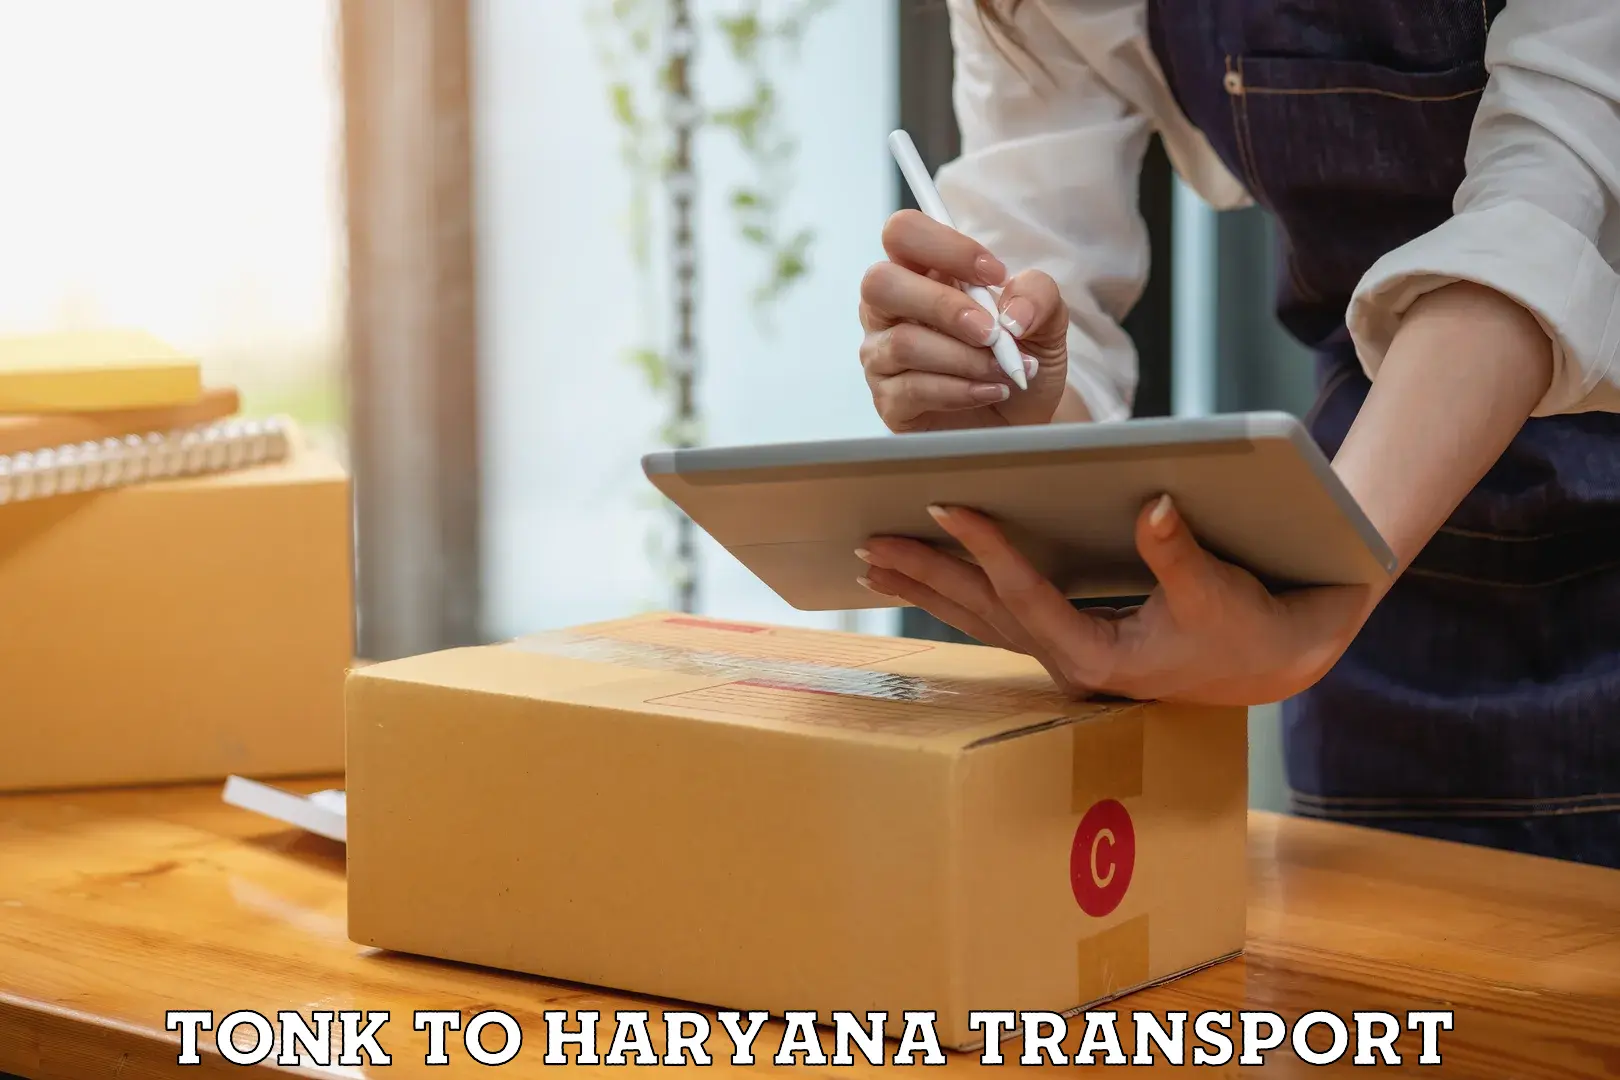 Air freight transport services Tonk to NCR Haryana